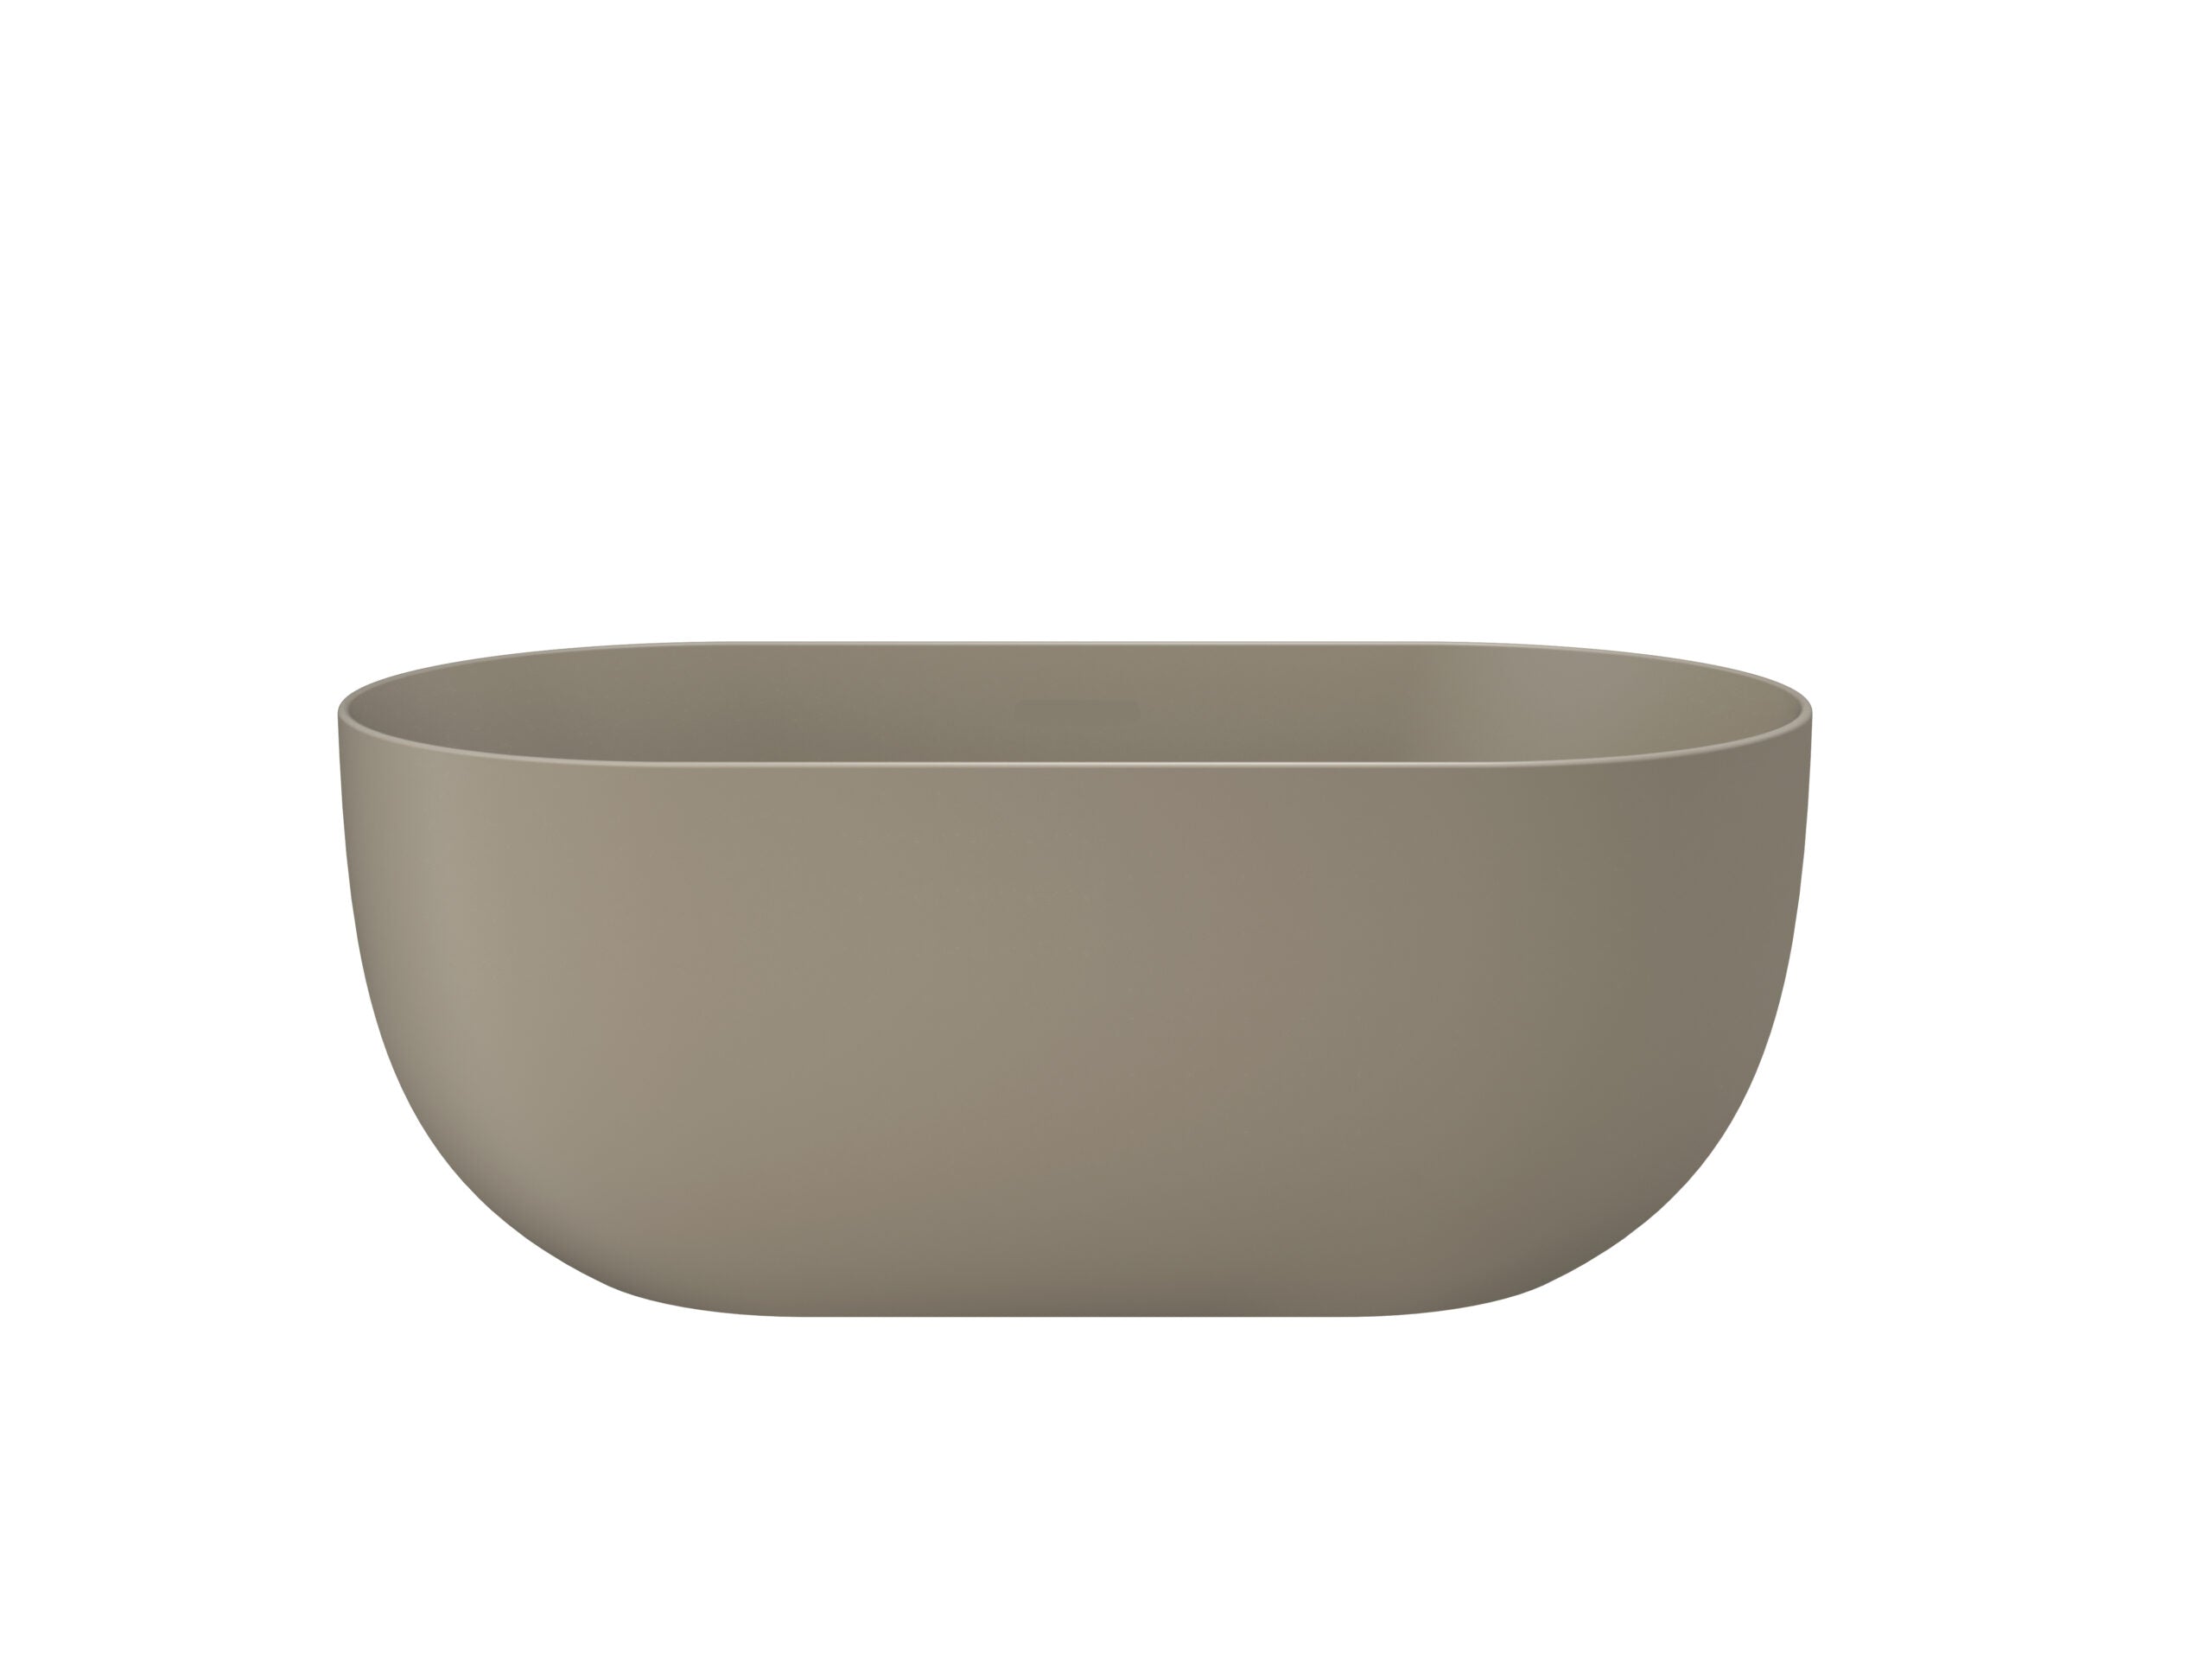 LINSOL NORA FREESTANDING BATHTUB WARM GREY (AVAILABLE IN 1500MM AND 1700MM)